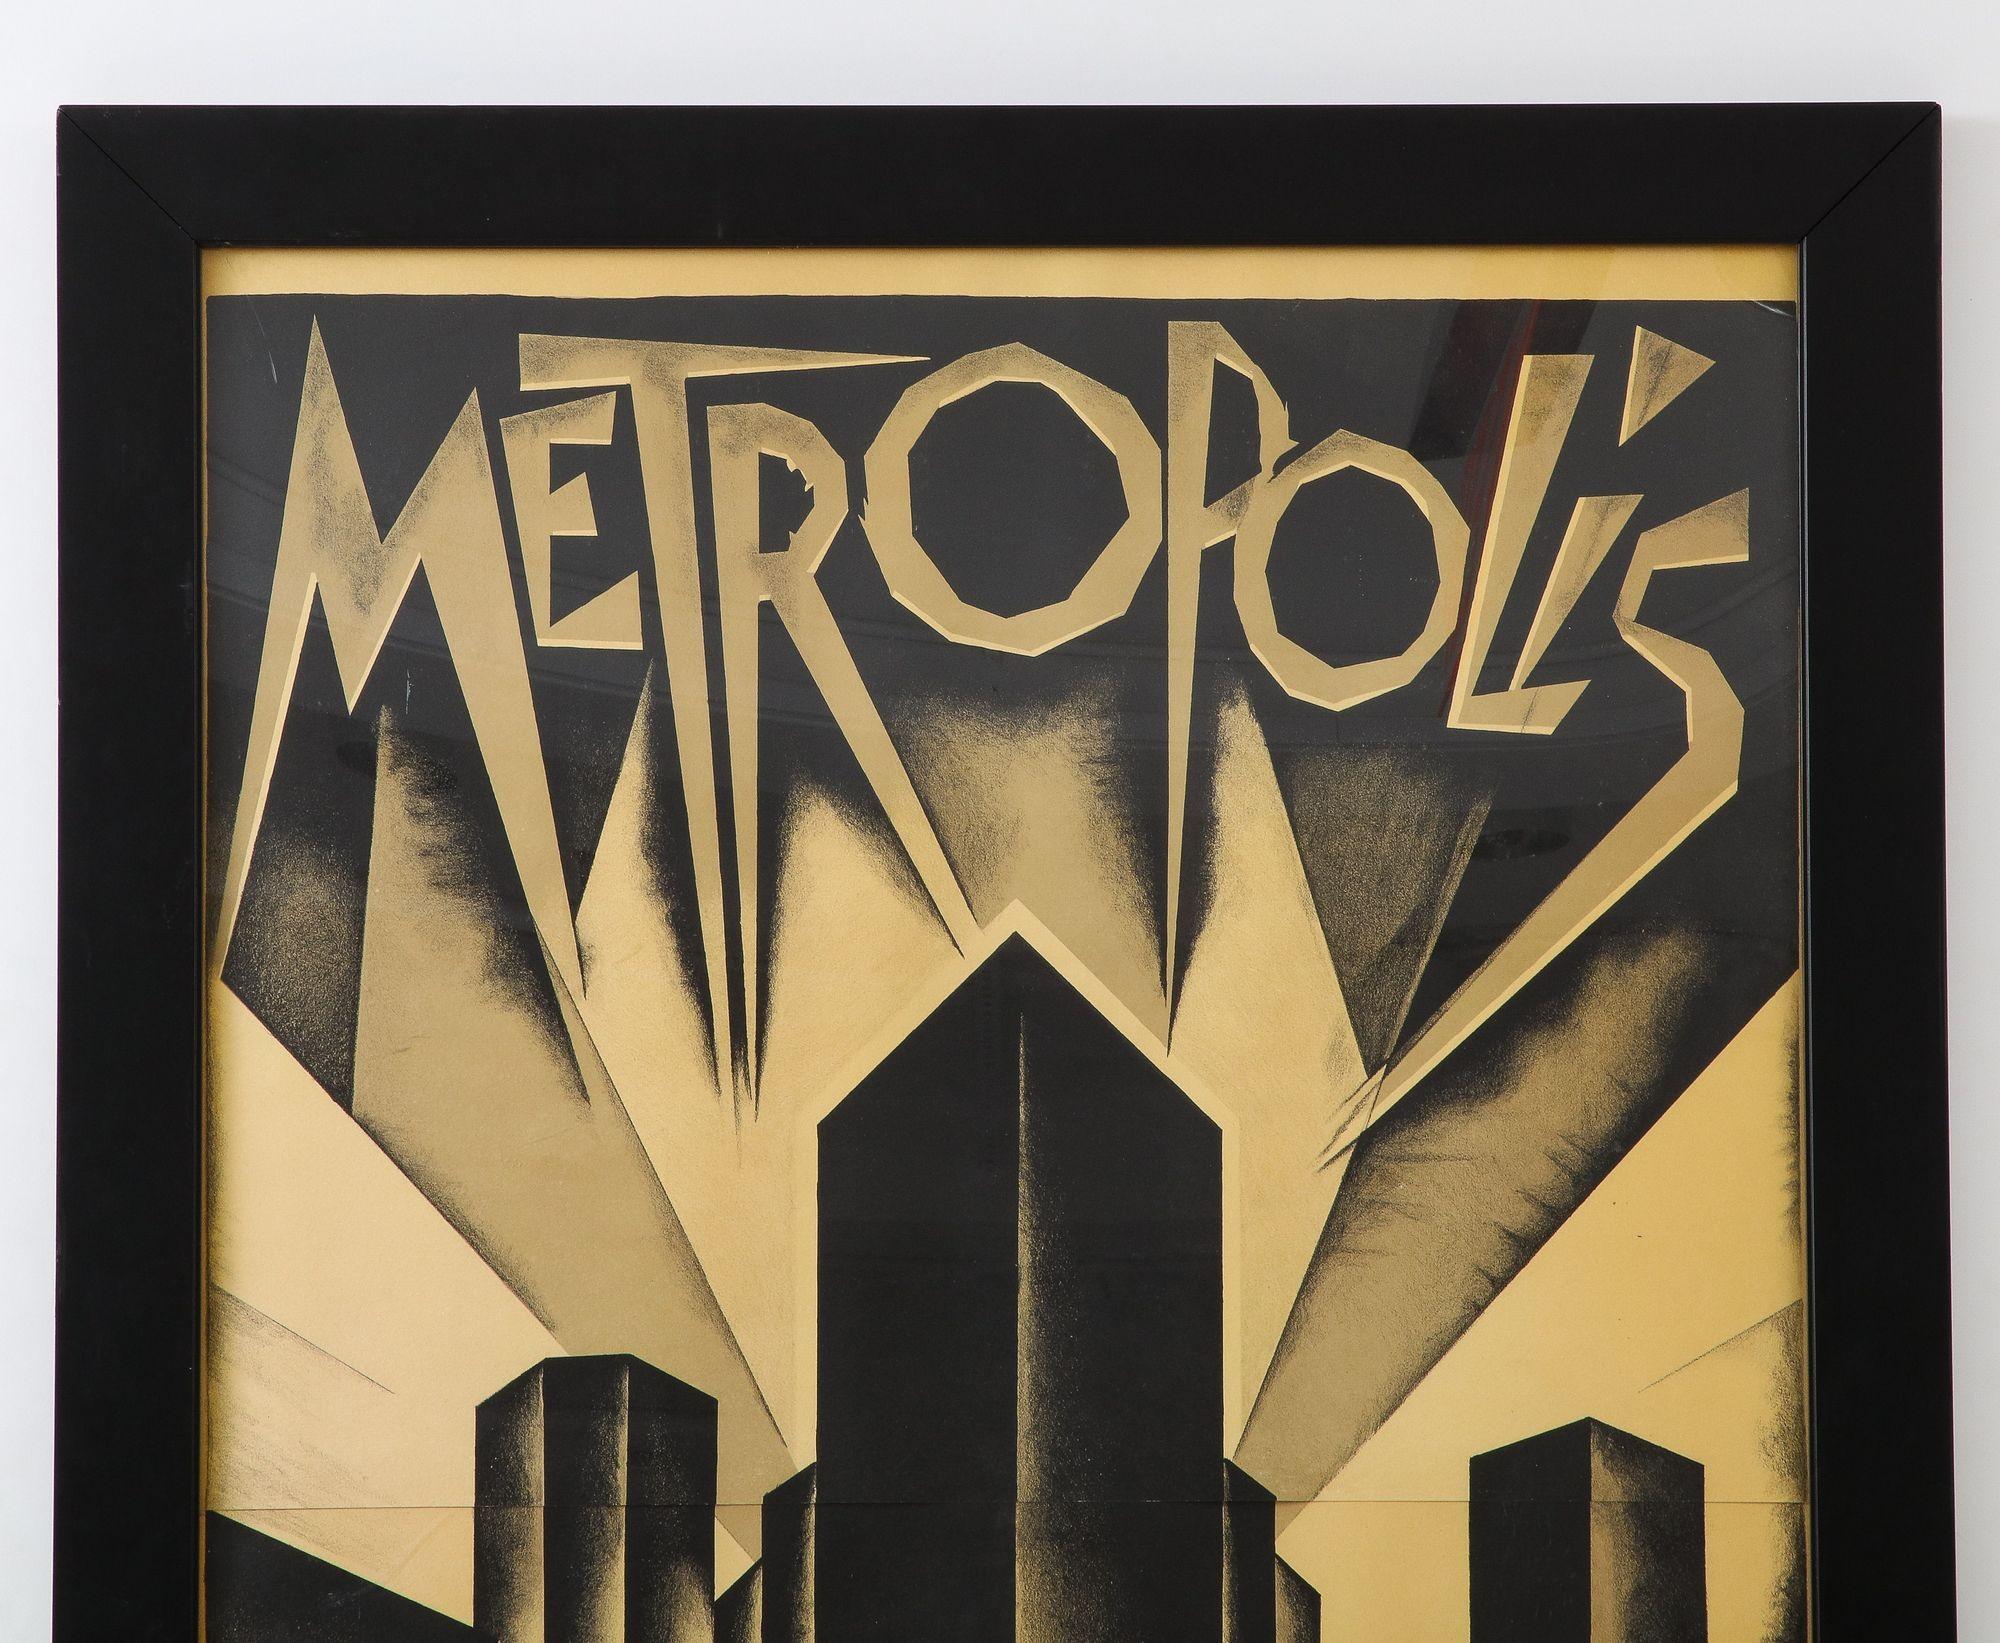 A striking Metropolis Large Framed 3-Sheet Lithograph Poster
The original poster is one of the rarest film posters in the world, selling for $500,000+ at auction. This is a faithful copy in full size.This limited edition 3-sheet lithograph preserves